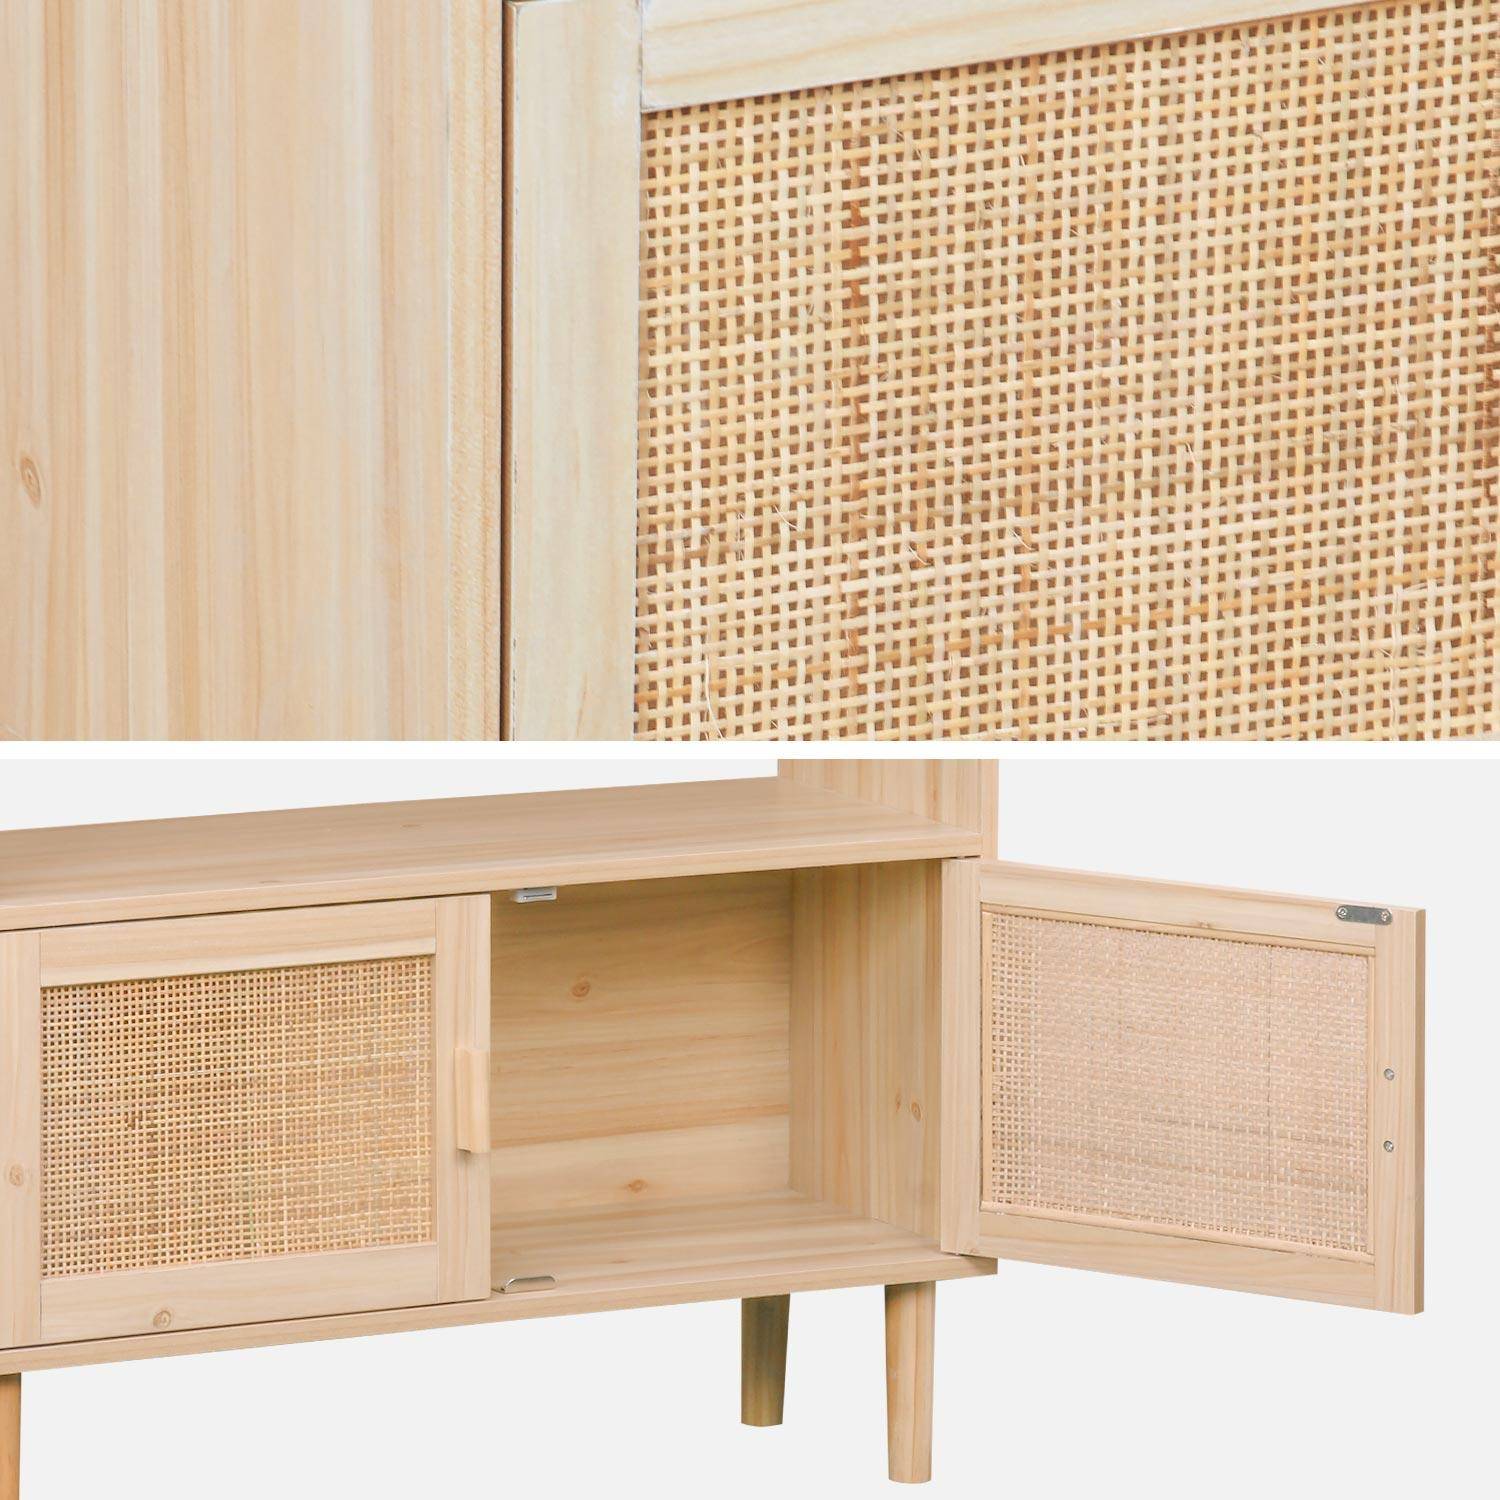 Woven rattan bookcase with storage cupboard, 3 shelves, 2 doors, 80x30x140cm - Camargue - Natural Photo6